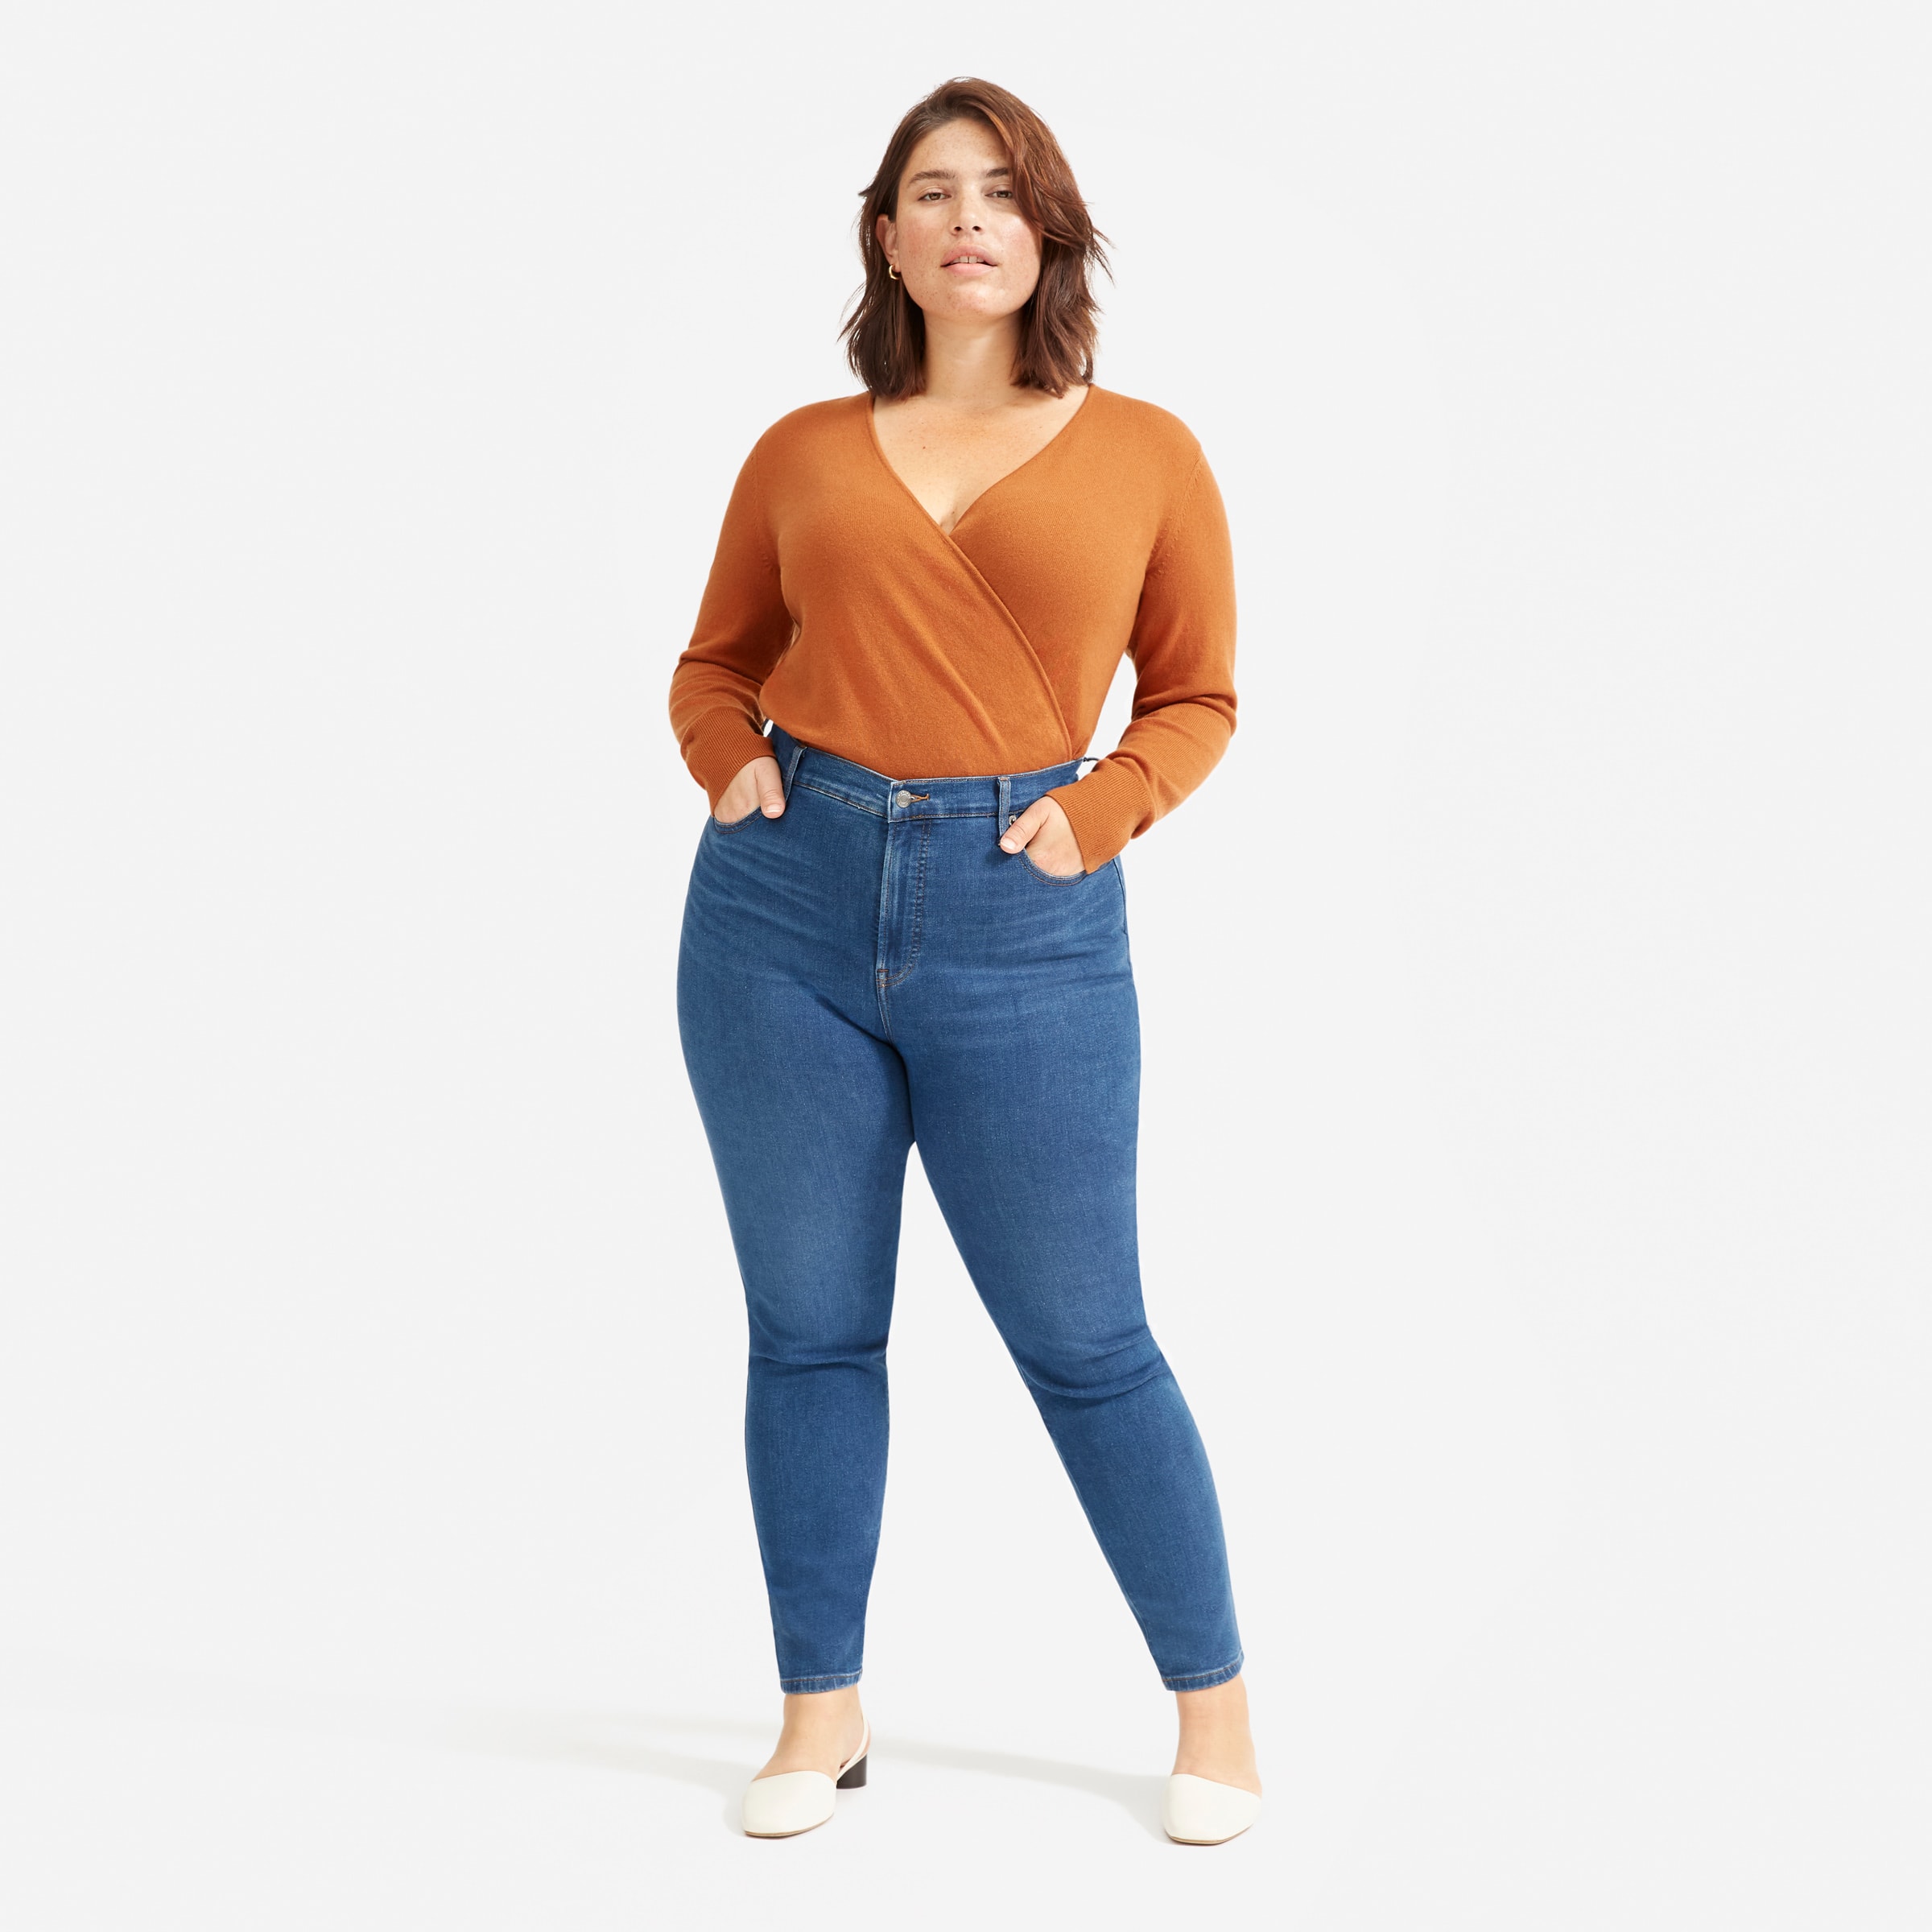 Everlane - The wait is over. Introducing the High Rise